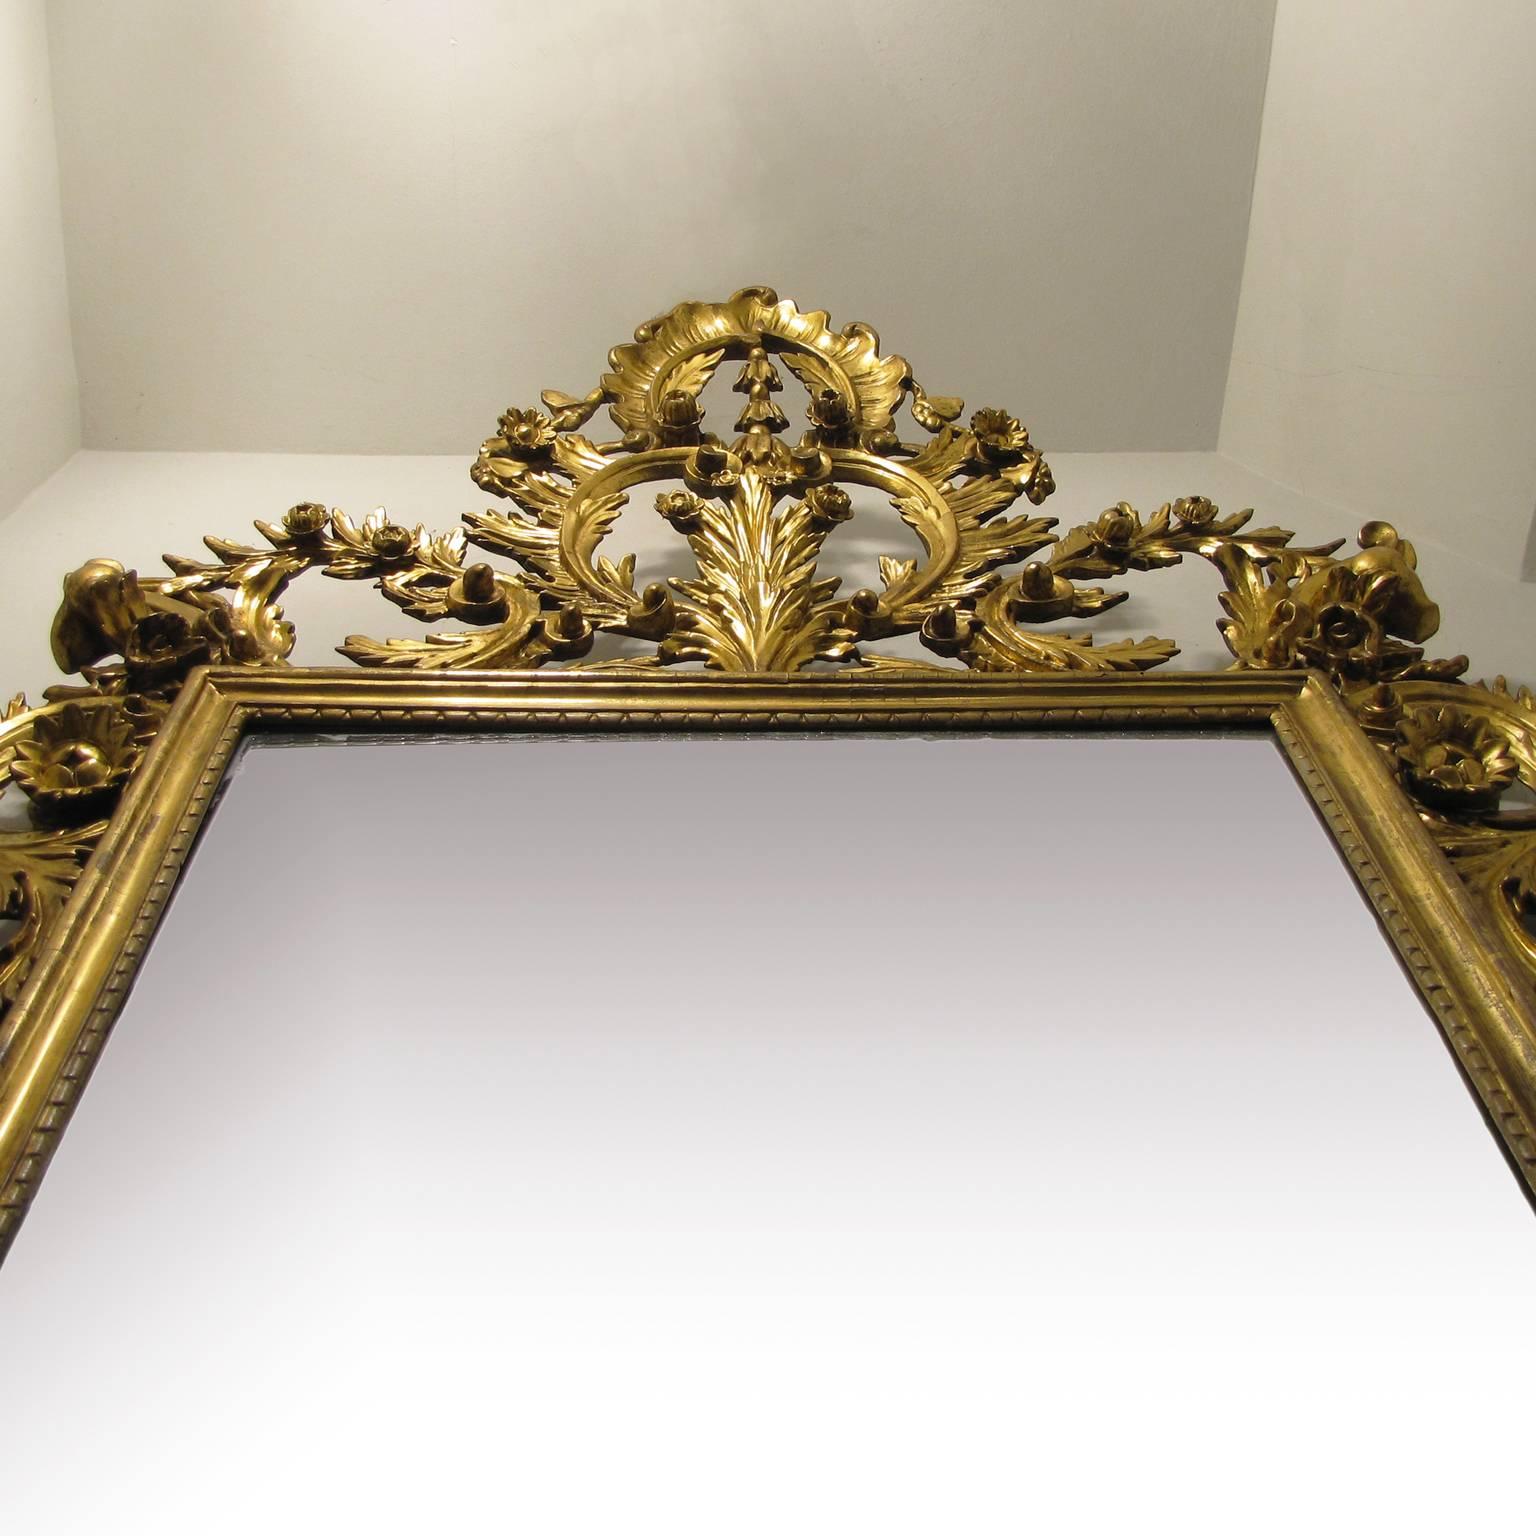 Tuscan Late 19th Century Louis XVI Mirror with a Carved and Gilt Wooden Frame For Sale 3